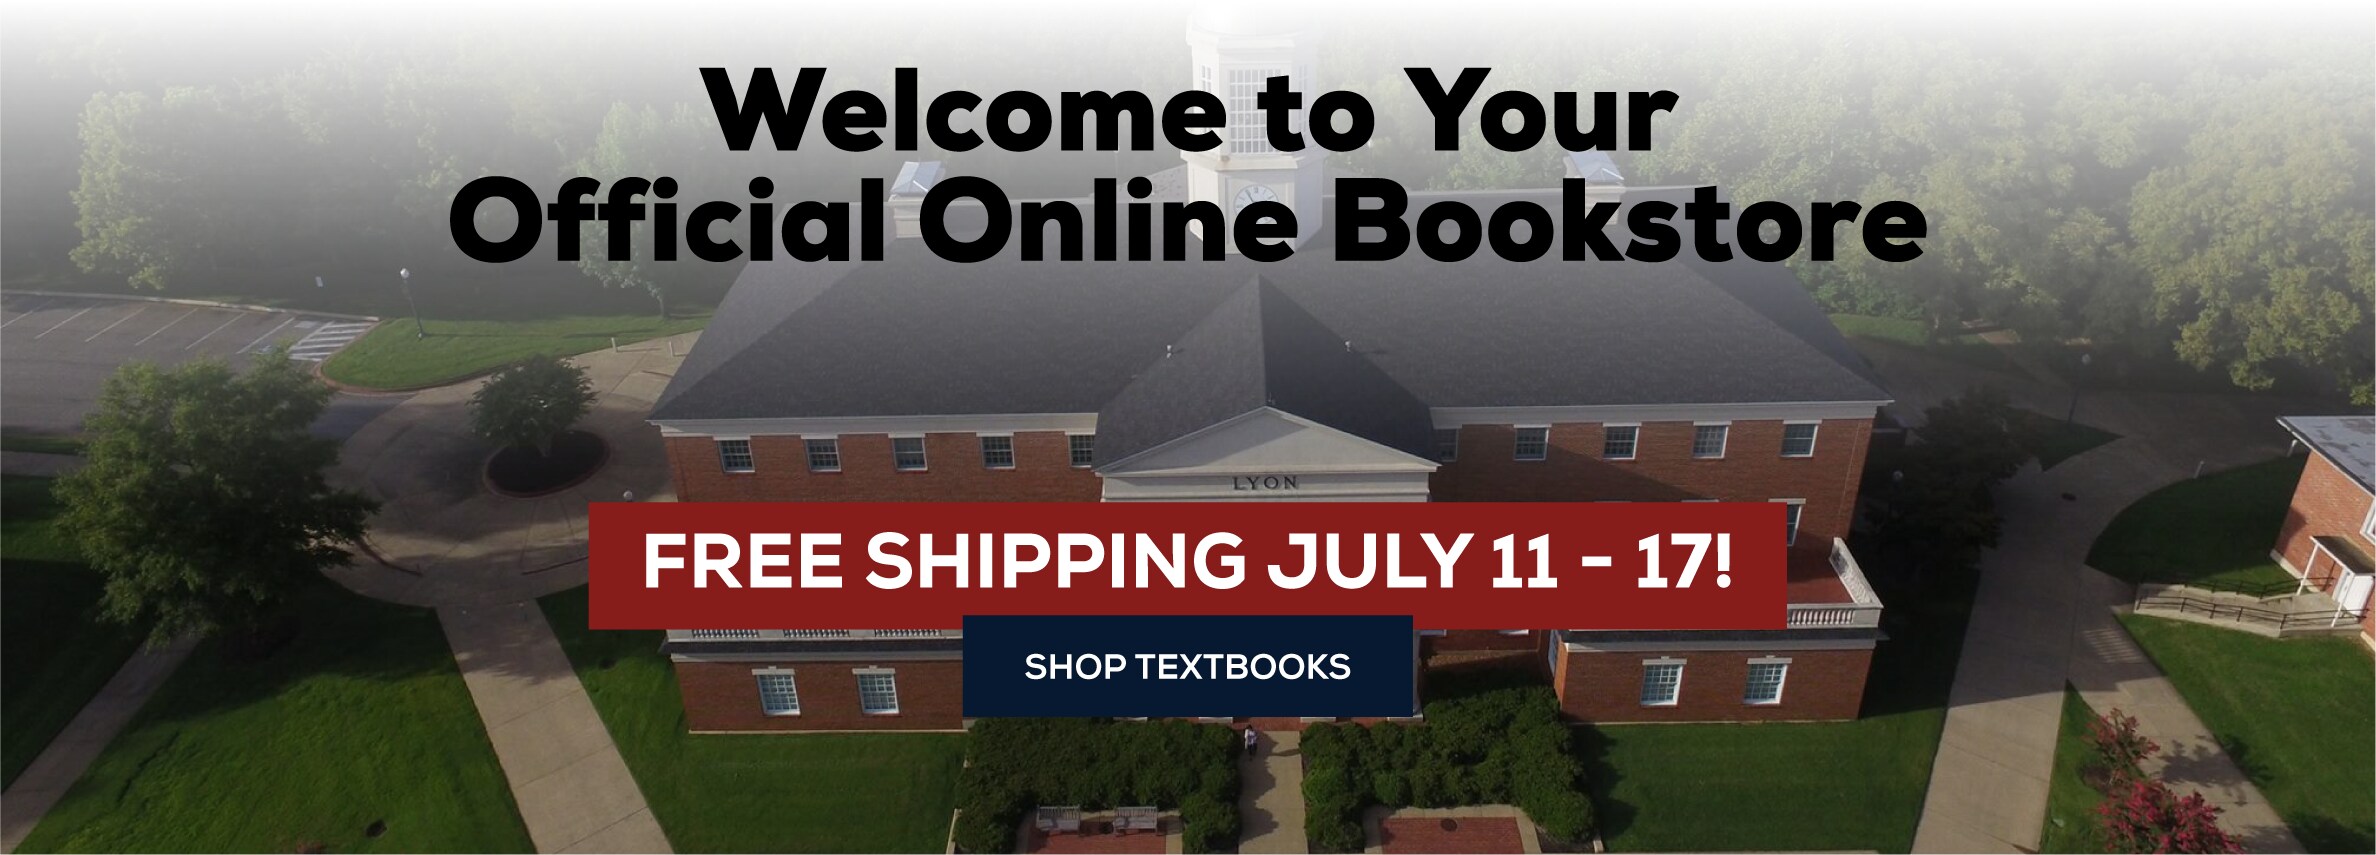 Welcome to your official online bookstore. Free shipping July 11 through July 17! Shop textbooks.